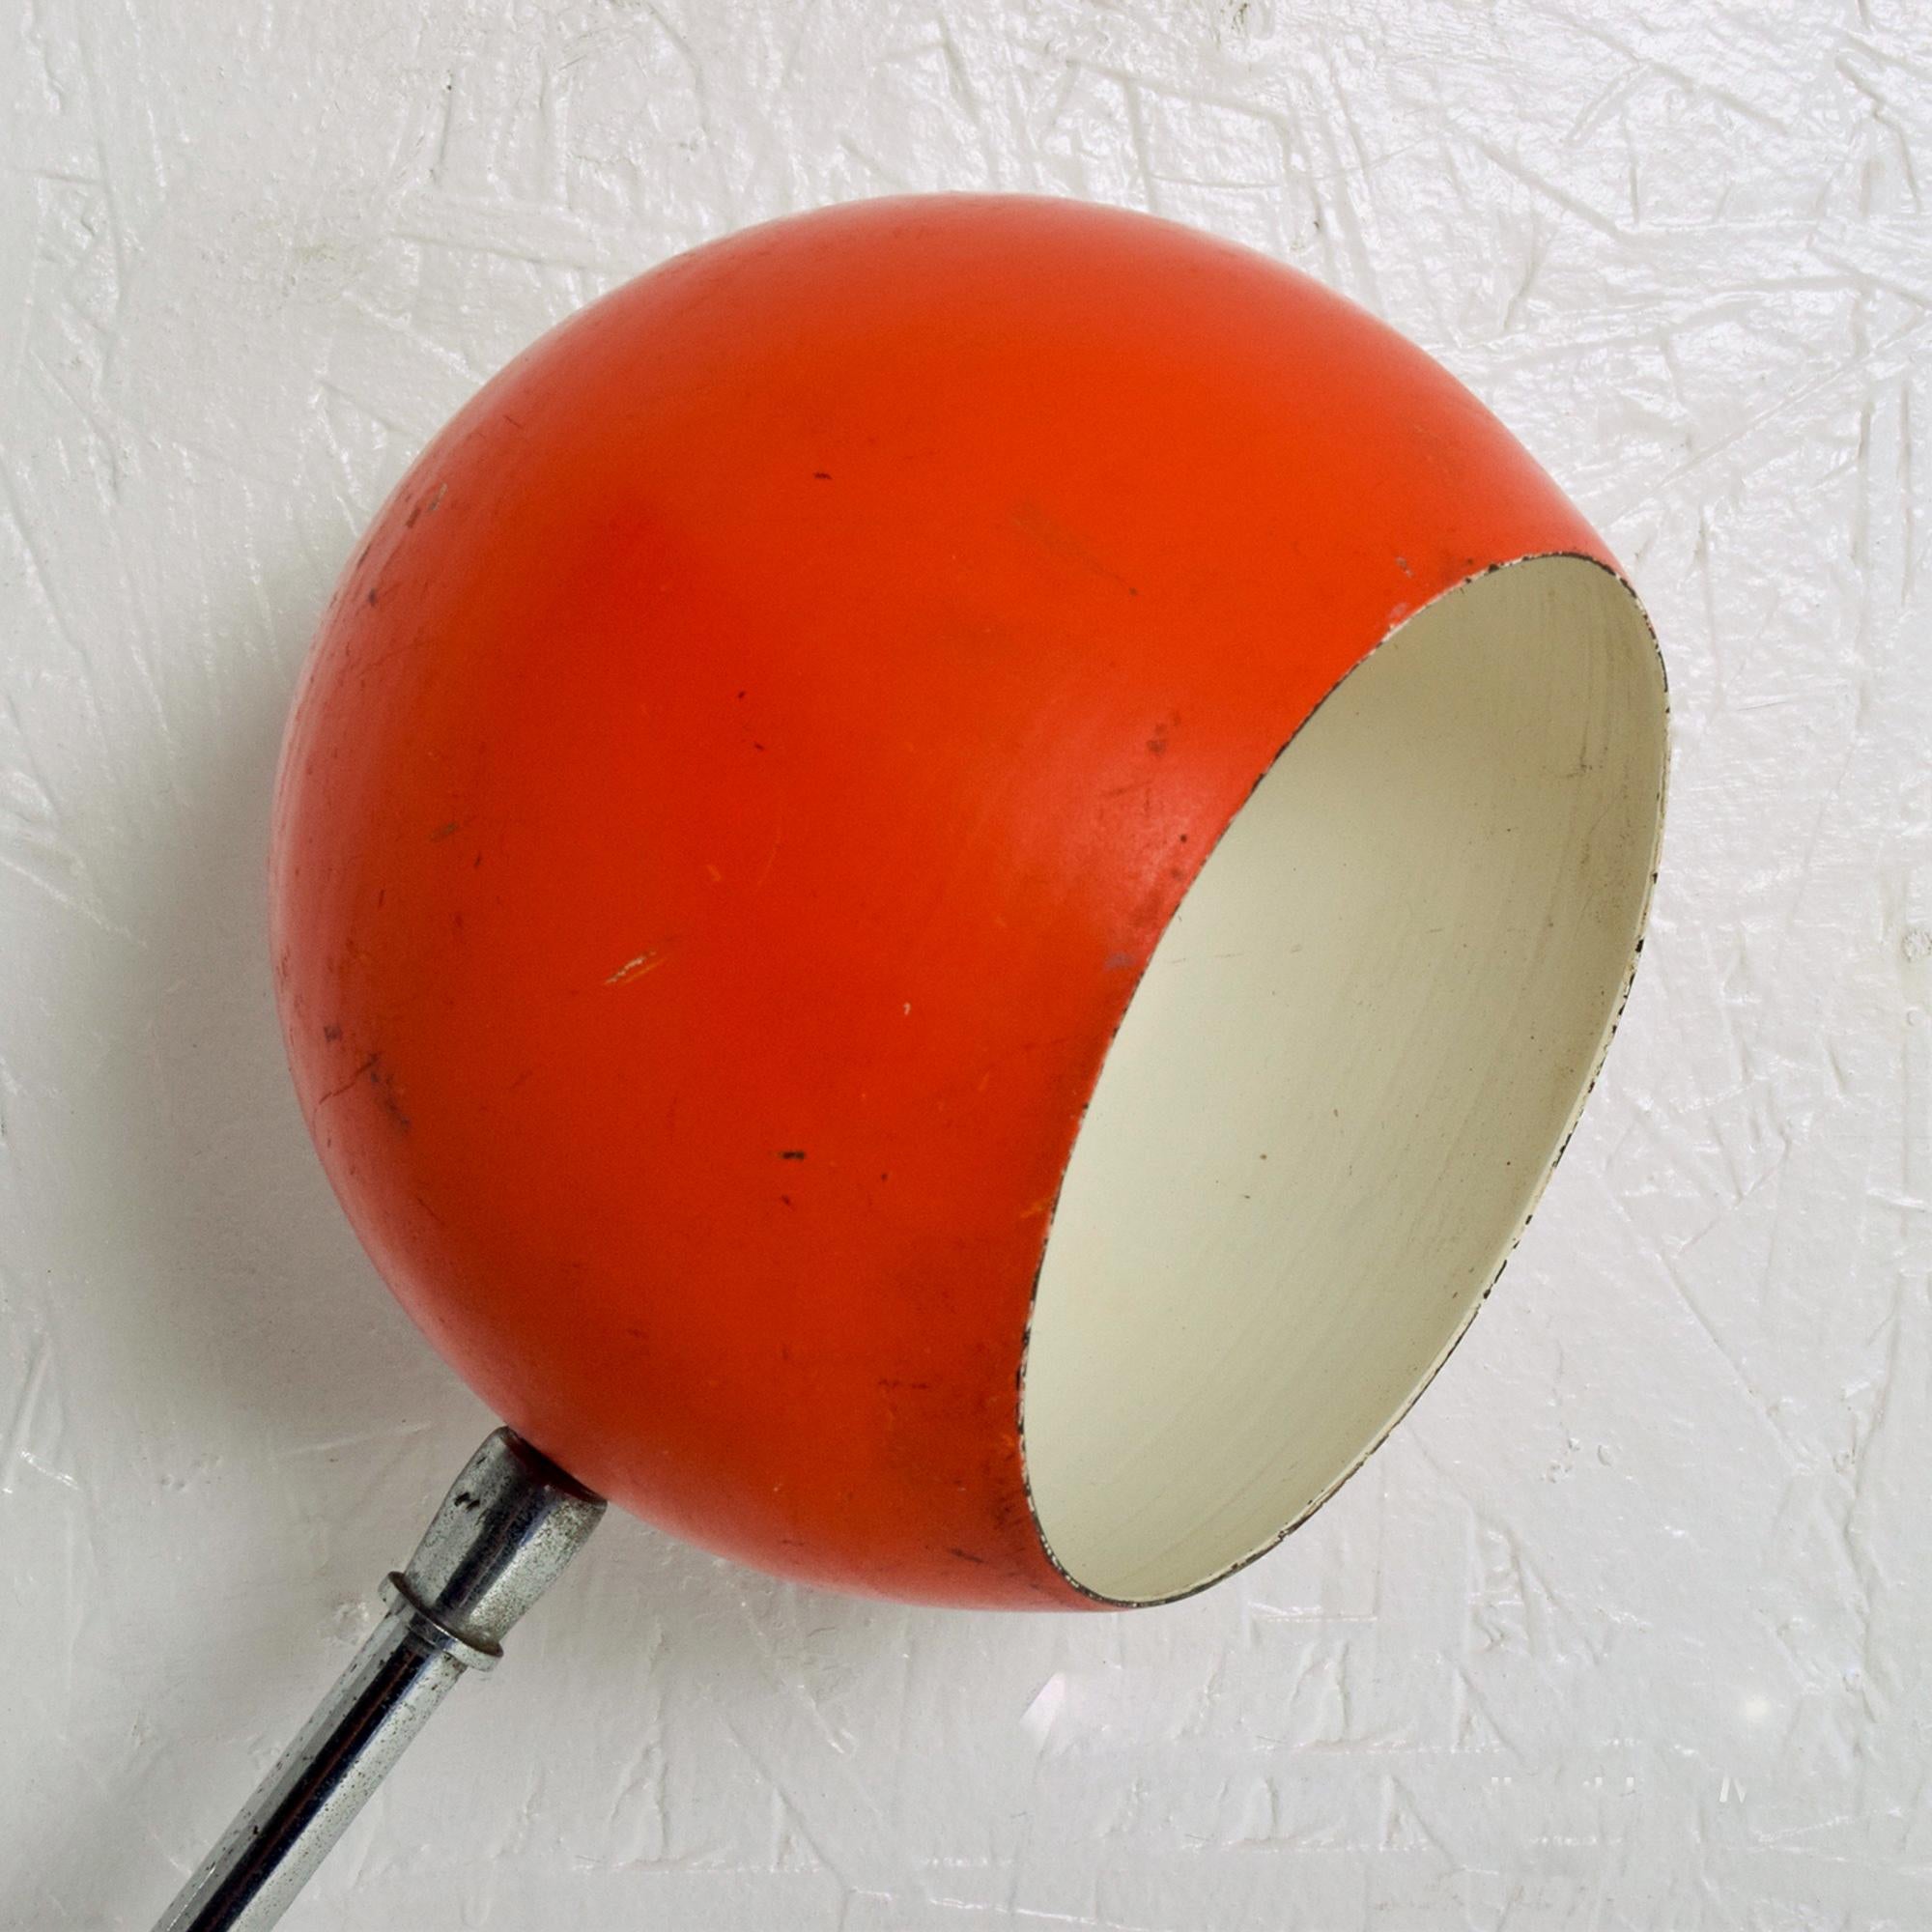 1970s Style of Robert Sonneman, Serge Mouille and Stilnovo splashy RED Clamp Lamp for Table Desk Light
16 H x 21 D x 5 .5 W inches
Adjustable Height Articulating Arm
Original Unrestored Vintage Condition Preowned Piece. Expect vintage wear.
Refer to